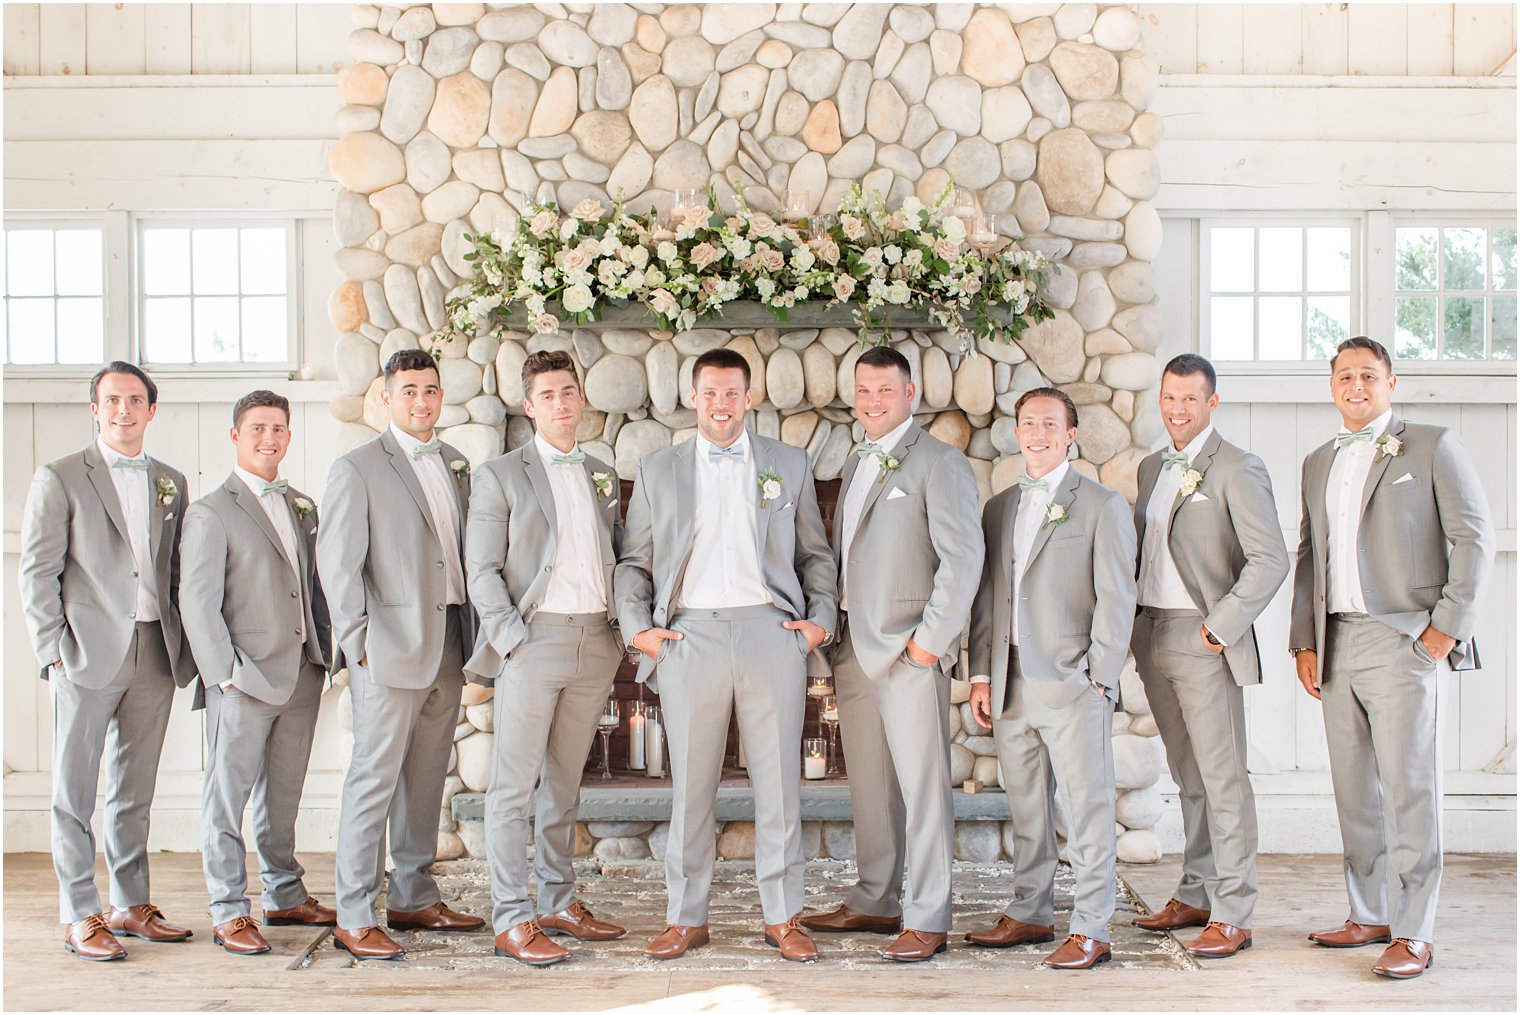 groom poses with groomsmen in grey suits by stone fireplace at Bonnet Island Estate